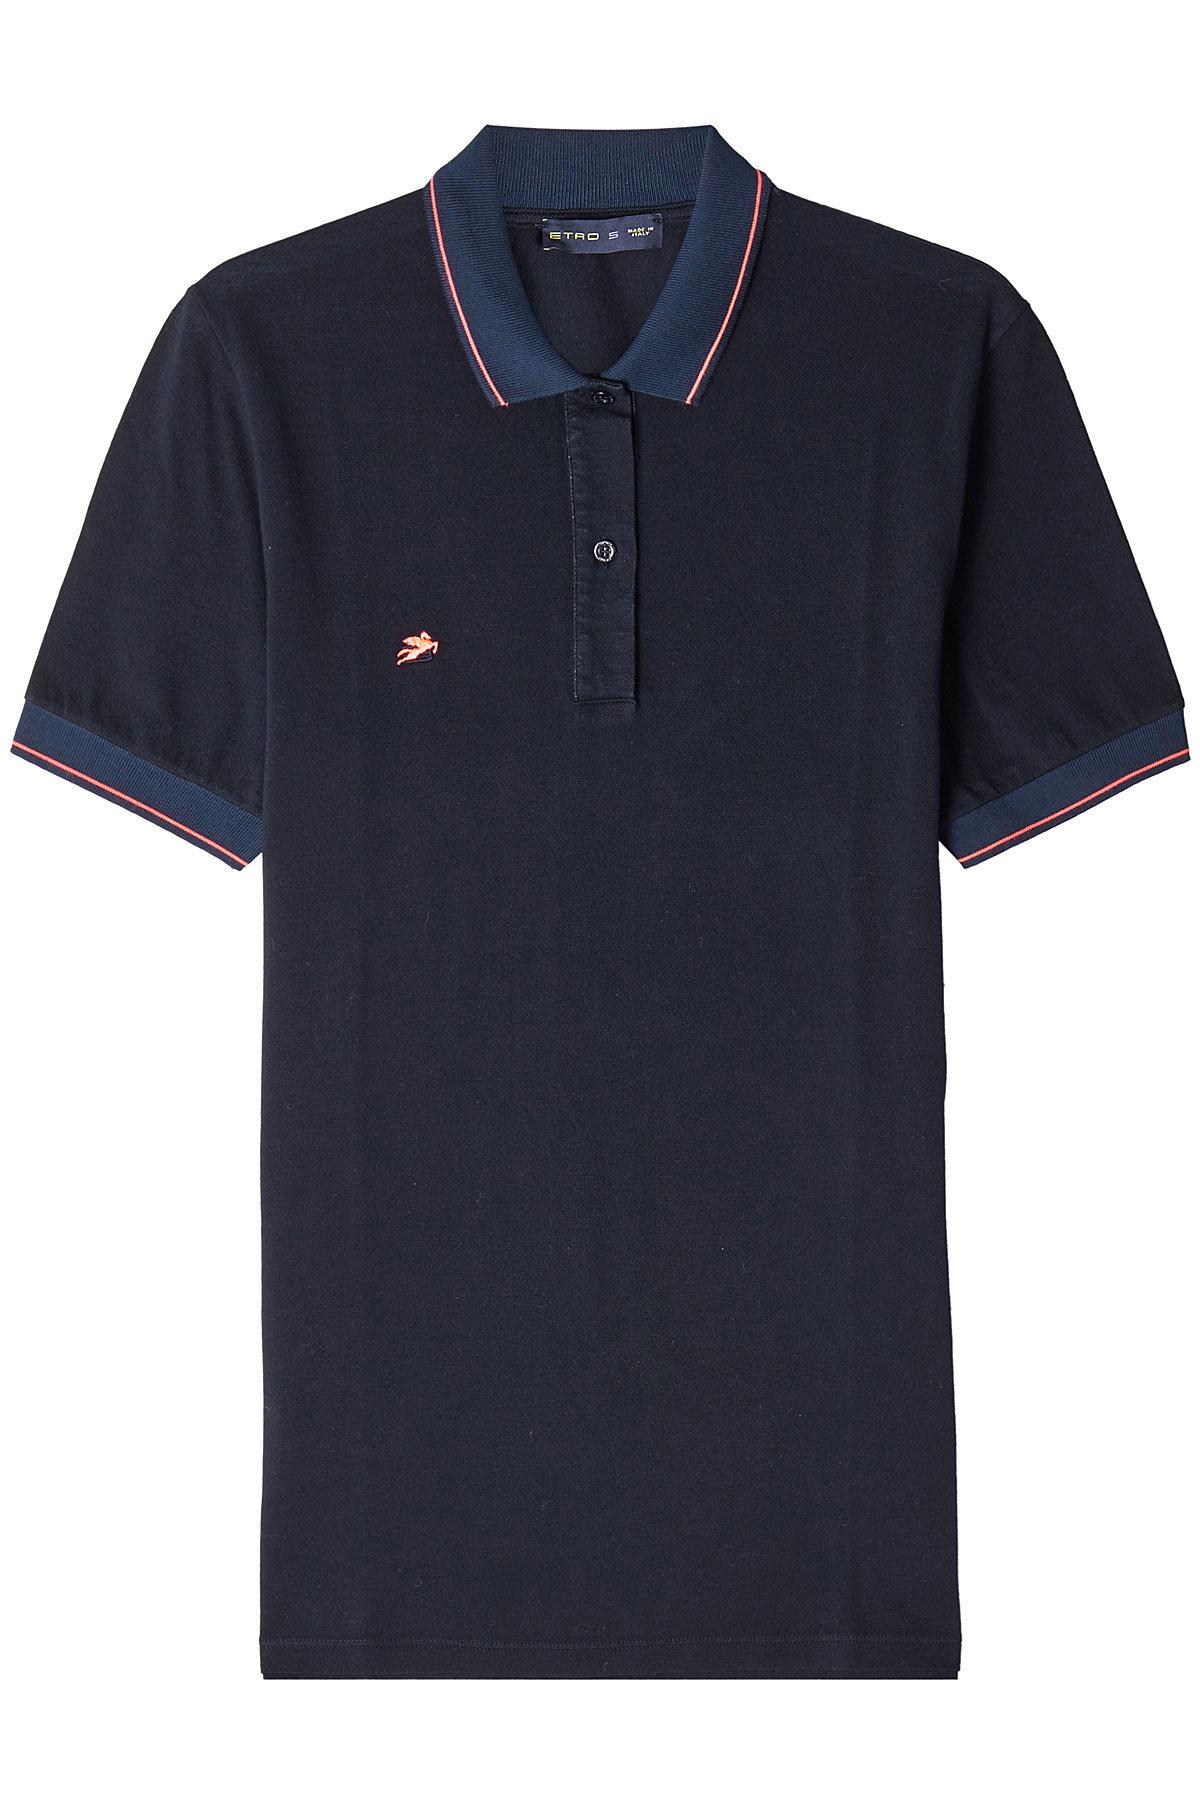 Lyst - Etro Cotton Polo Shirt in Blue for Men